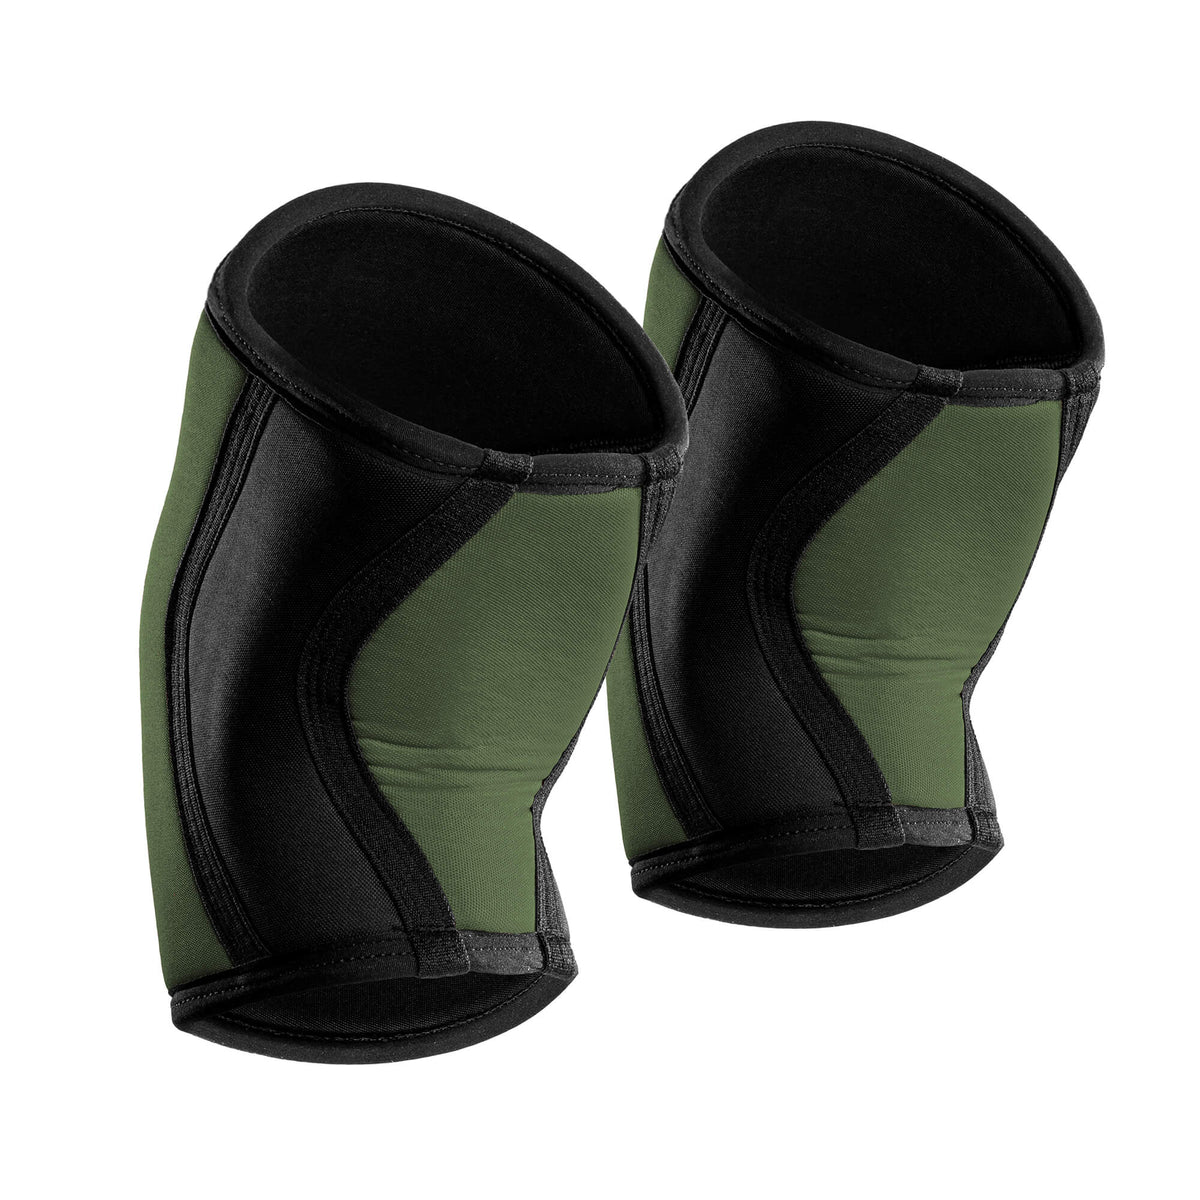 7mm Knee Sleeves (25cm) - Green - Rise Canada